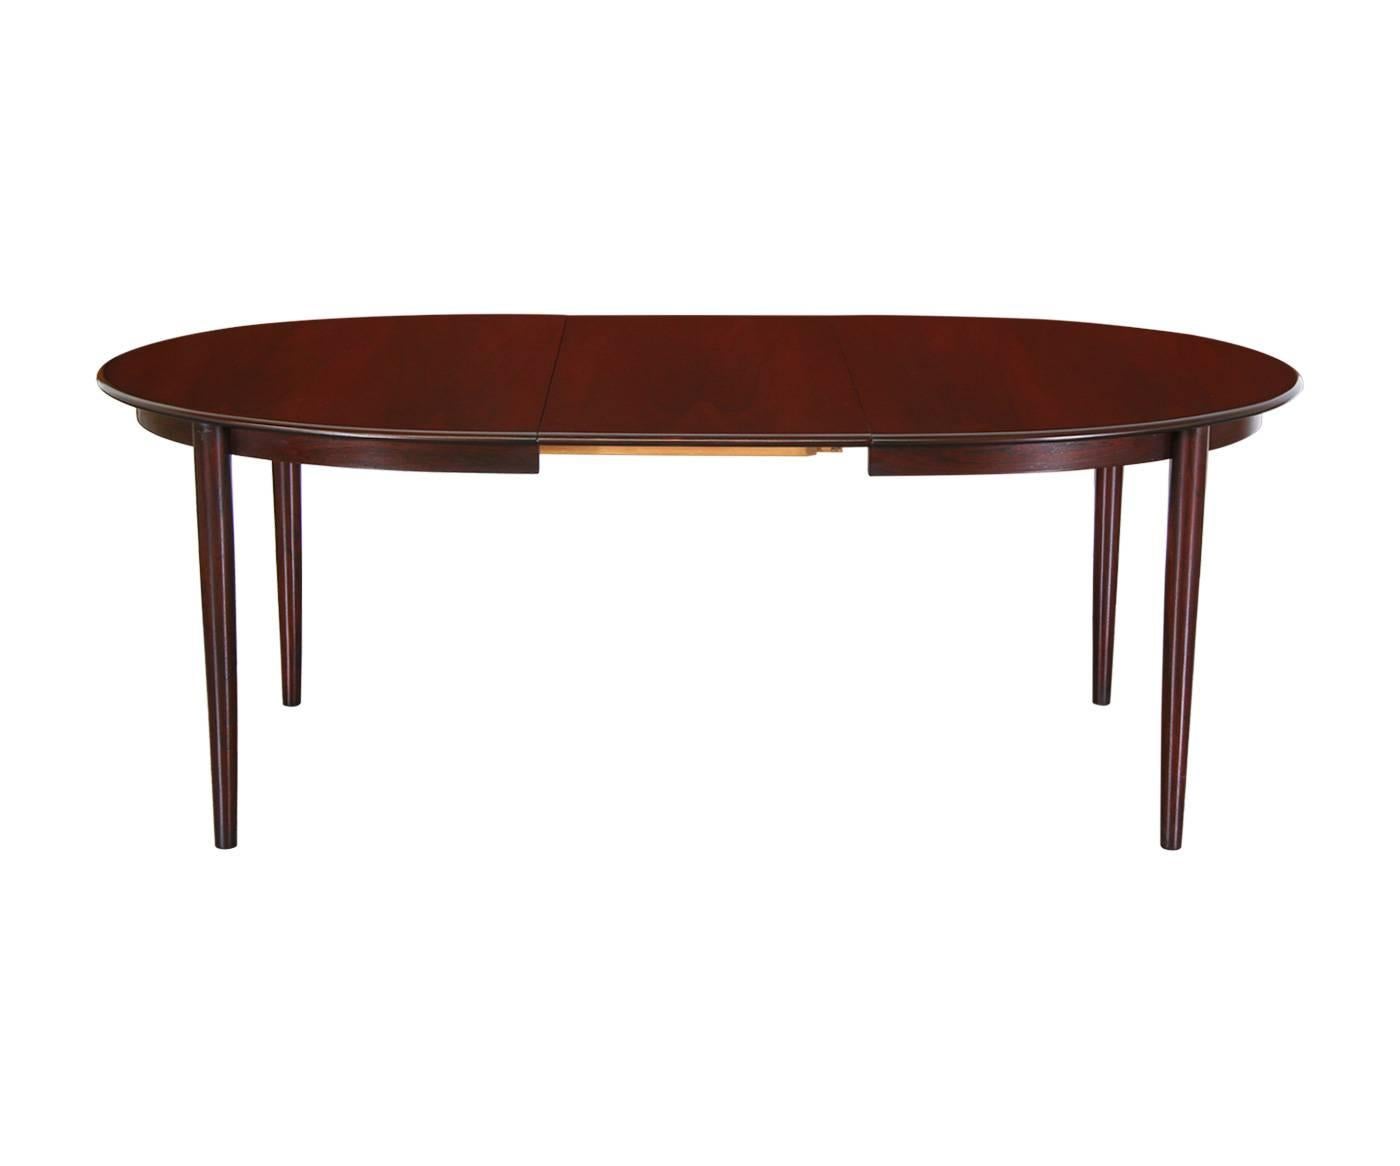 Designer: Unknown
Manufacturer: Unknown
Period/Style: Danish Modern
Country: Denmark
Date: 1960’s

Dimensions: 28.25″H x 59″L x 41.25″W
Extension Leaf 19.75″
Materials: Rosewood
Condition: Excellent – Newly Refinished
Number of Items: